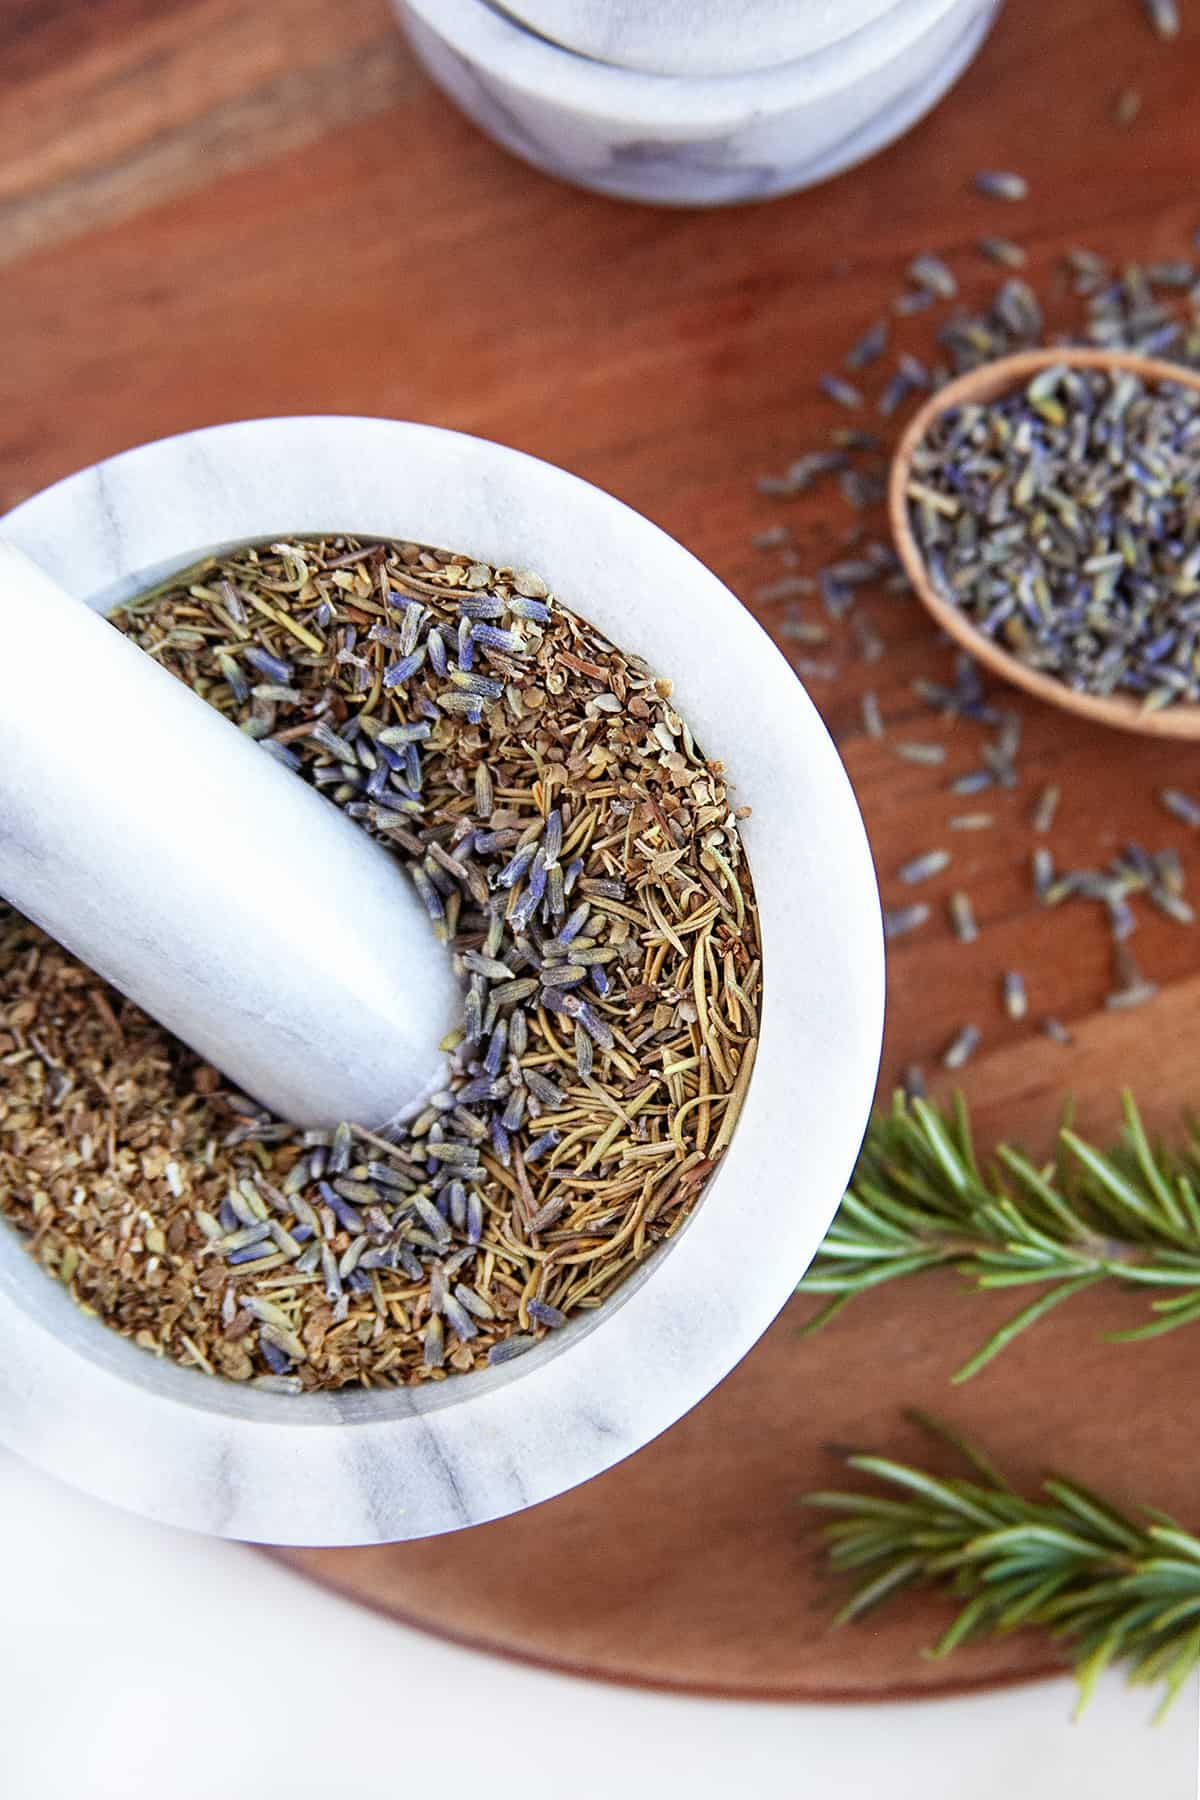 Showing lavender in Herbs de Provence in a mortar and pestle. 